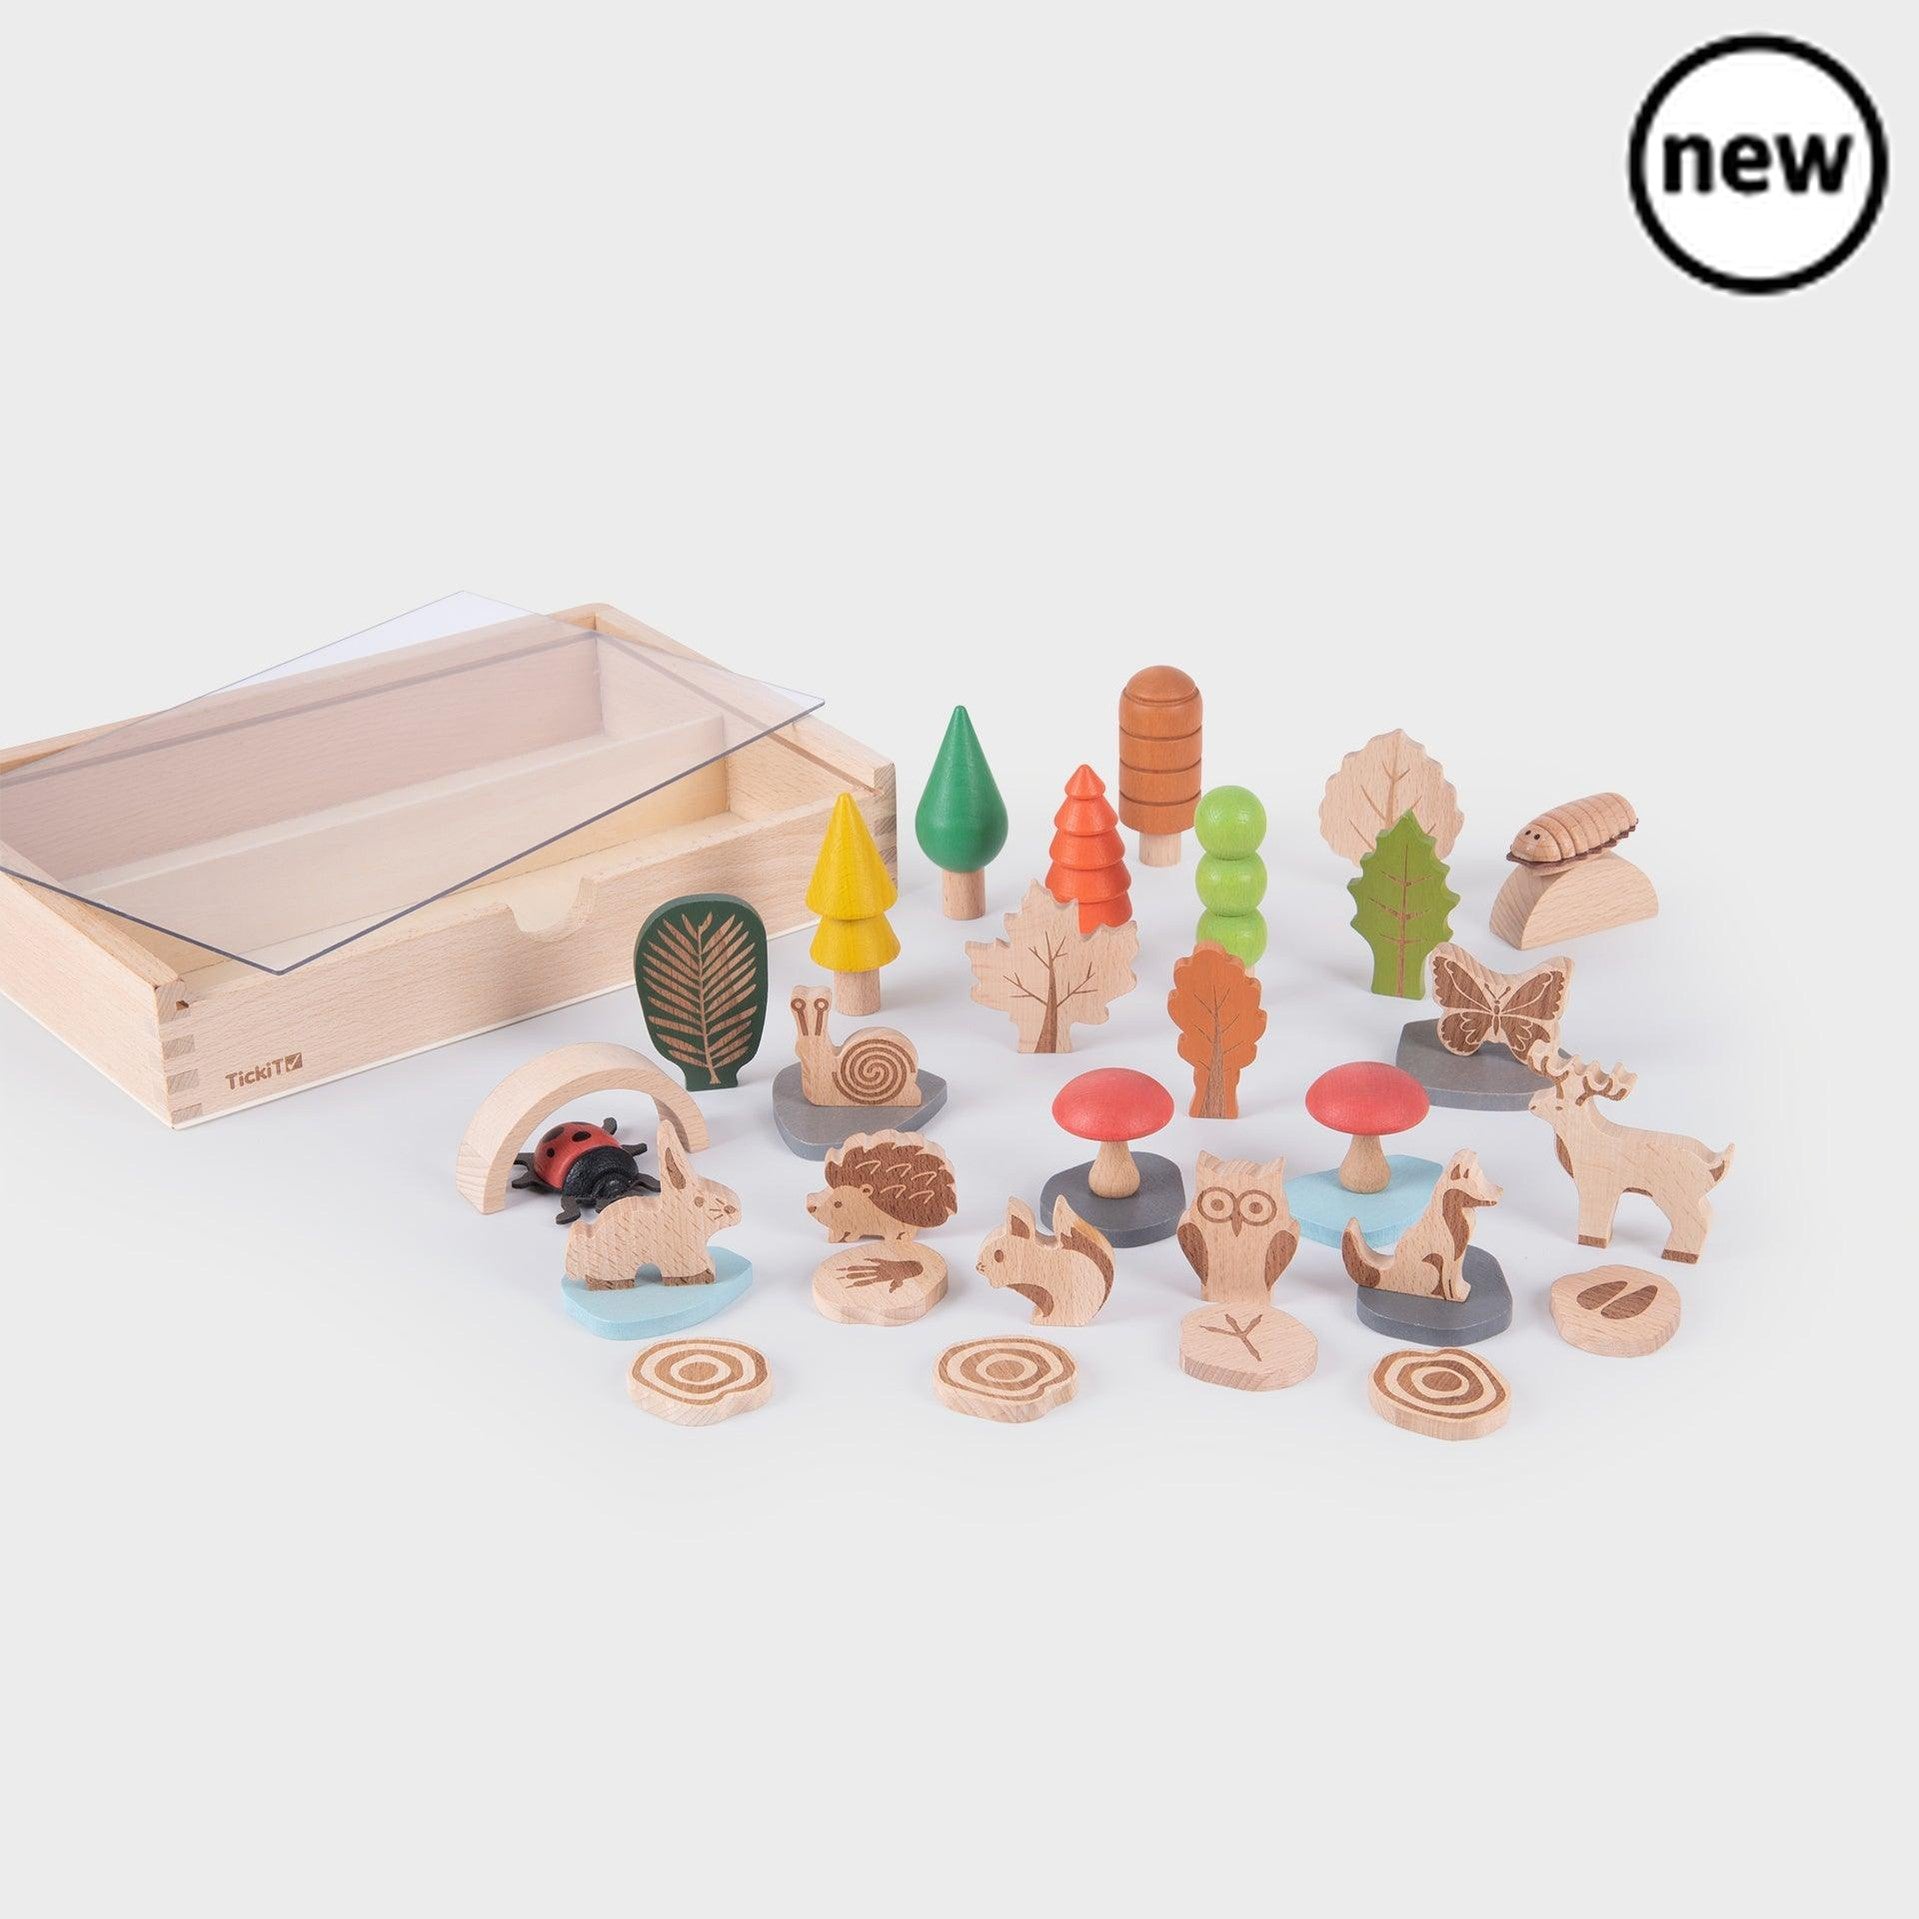 TickiT Woodland Trail Set, With the TickiT Woodland Trail Set, you can bring a piece of the great outdoors right into your home. This beautifully crafted set includes everything your little explorer needs to create their own woodland adventure.Inside the box, you'll find wooden trees, leaves, forest animals, minibeasts, stones, puddles, and even toadstools. Each piece is intricately designed with laser features, creating a tactile indentation design that is not only visually appealing but also perfect for m